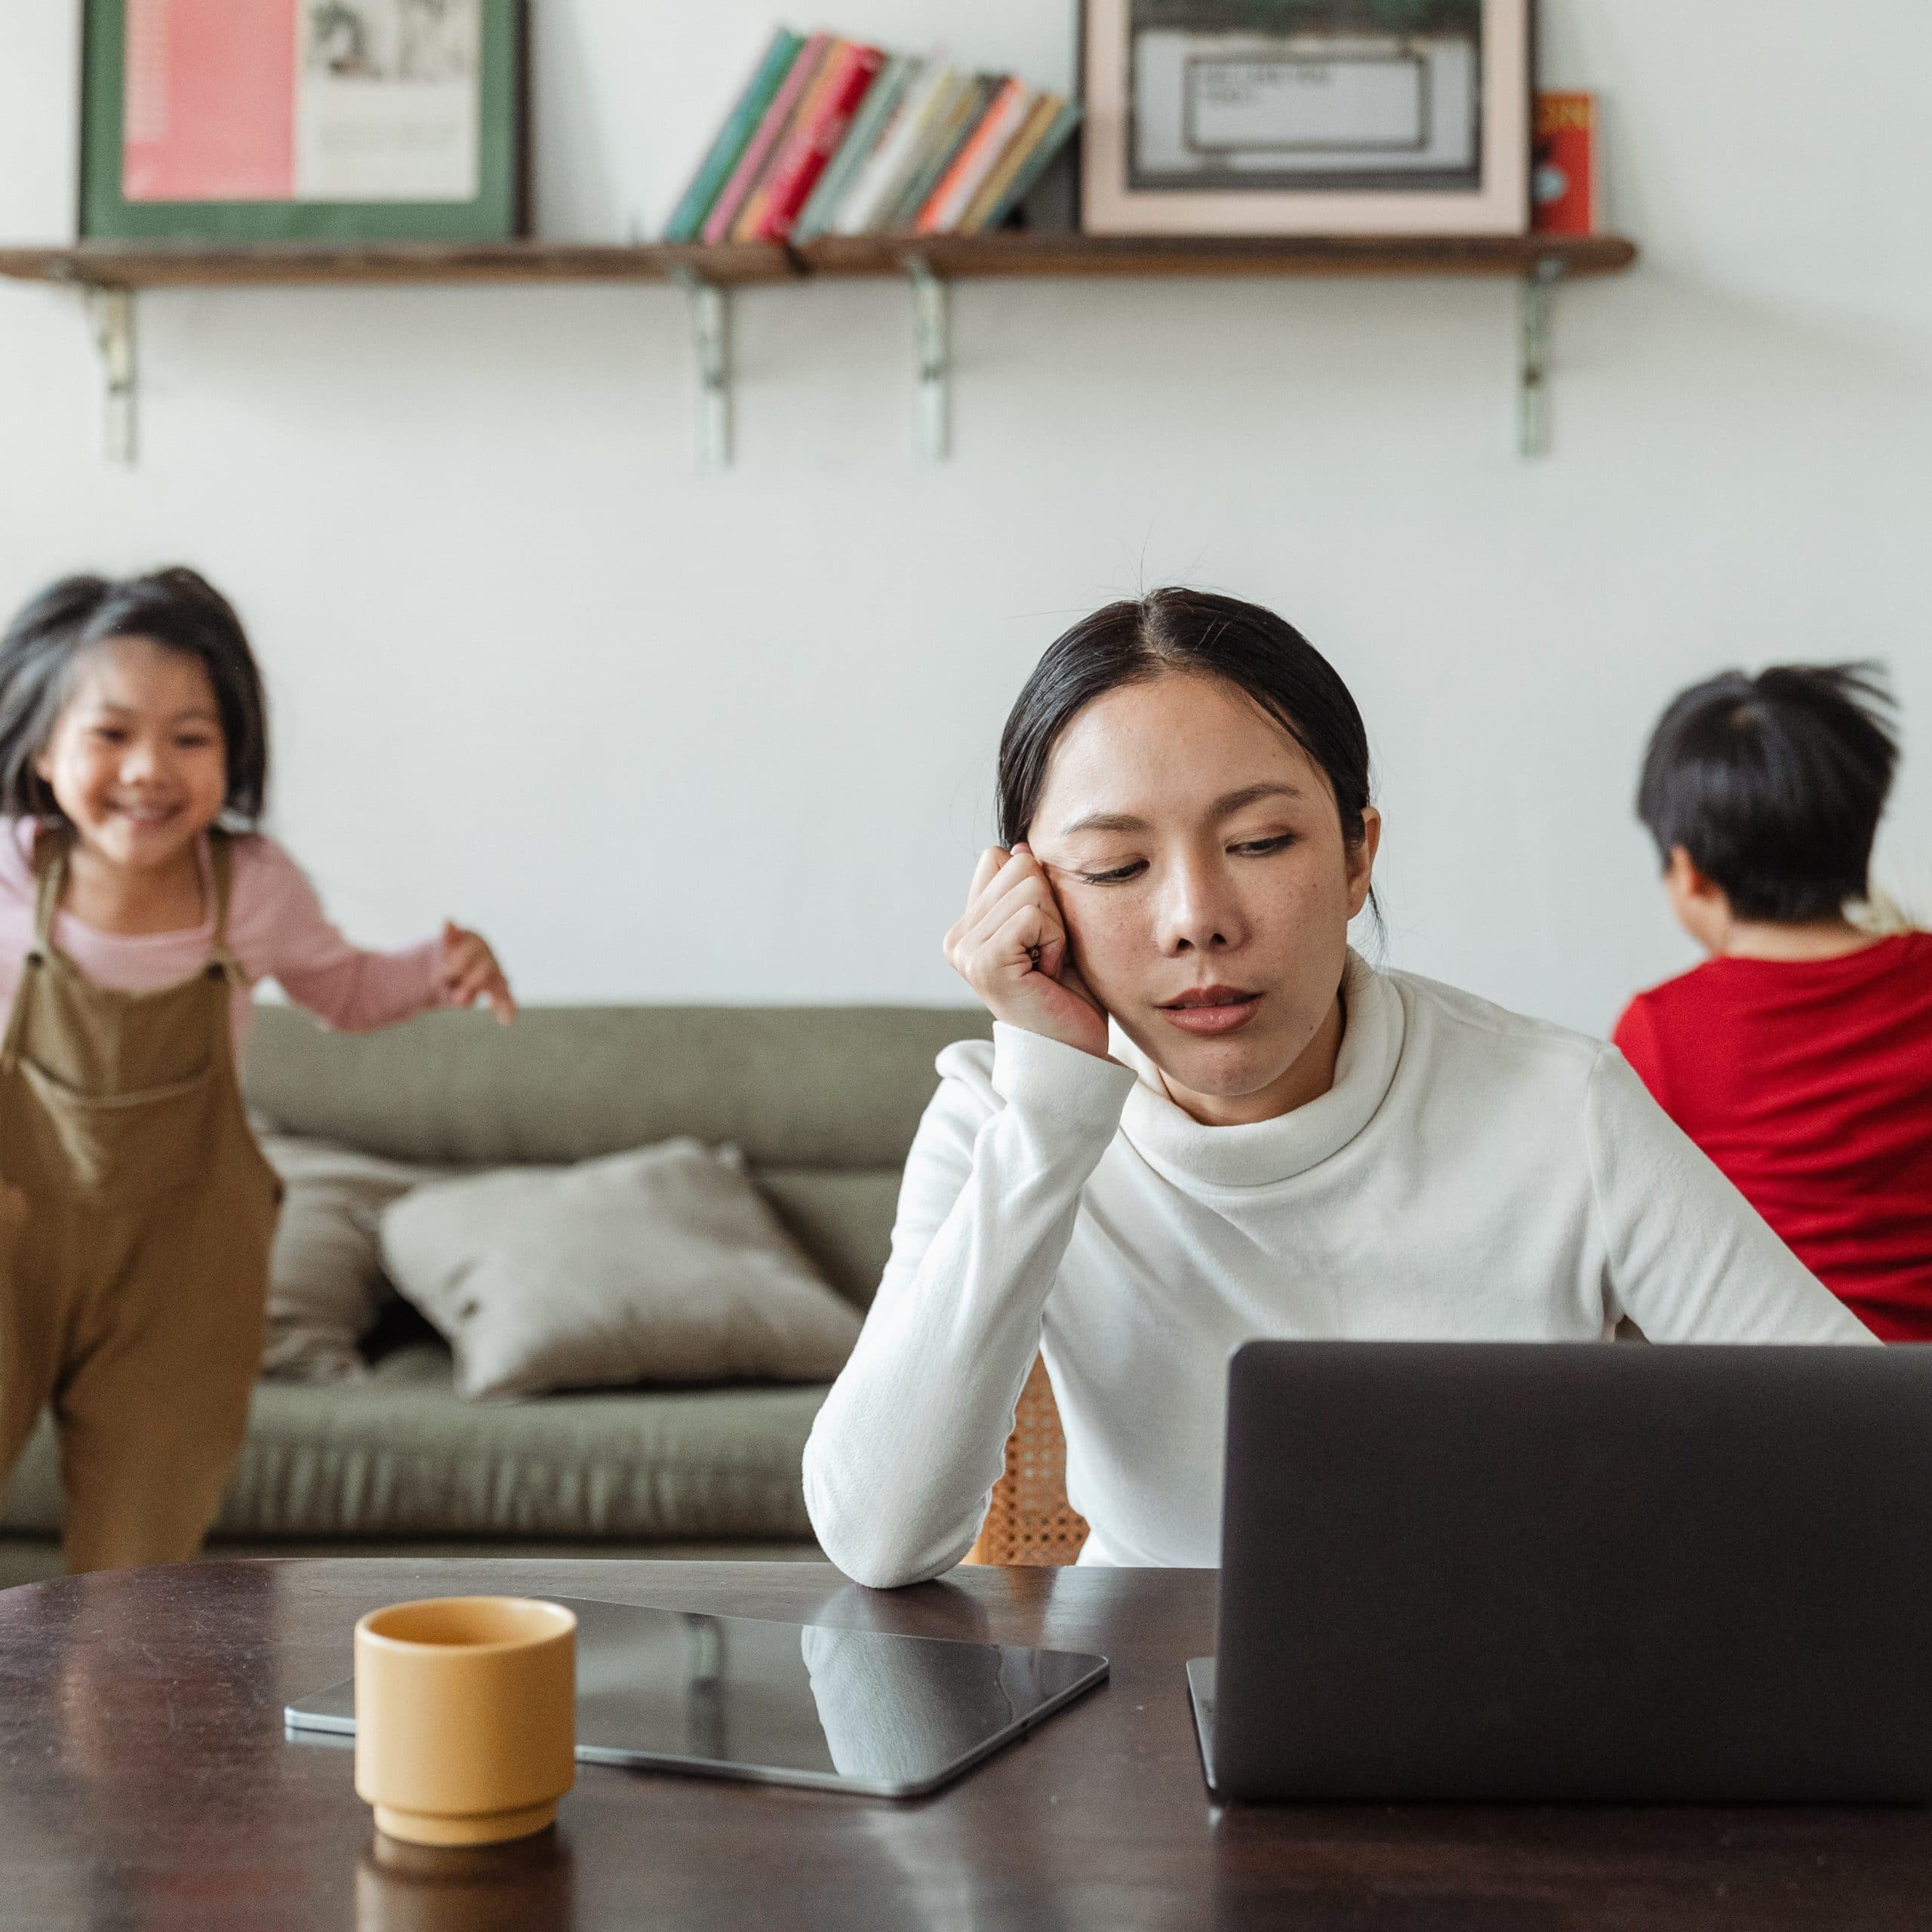 Stress can lead to feeling overwhelmed and burned out. A woman in a white sweater sits in front of her computer looking stressed while two small children play behind her.